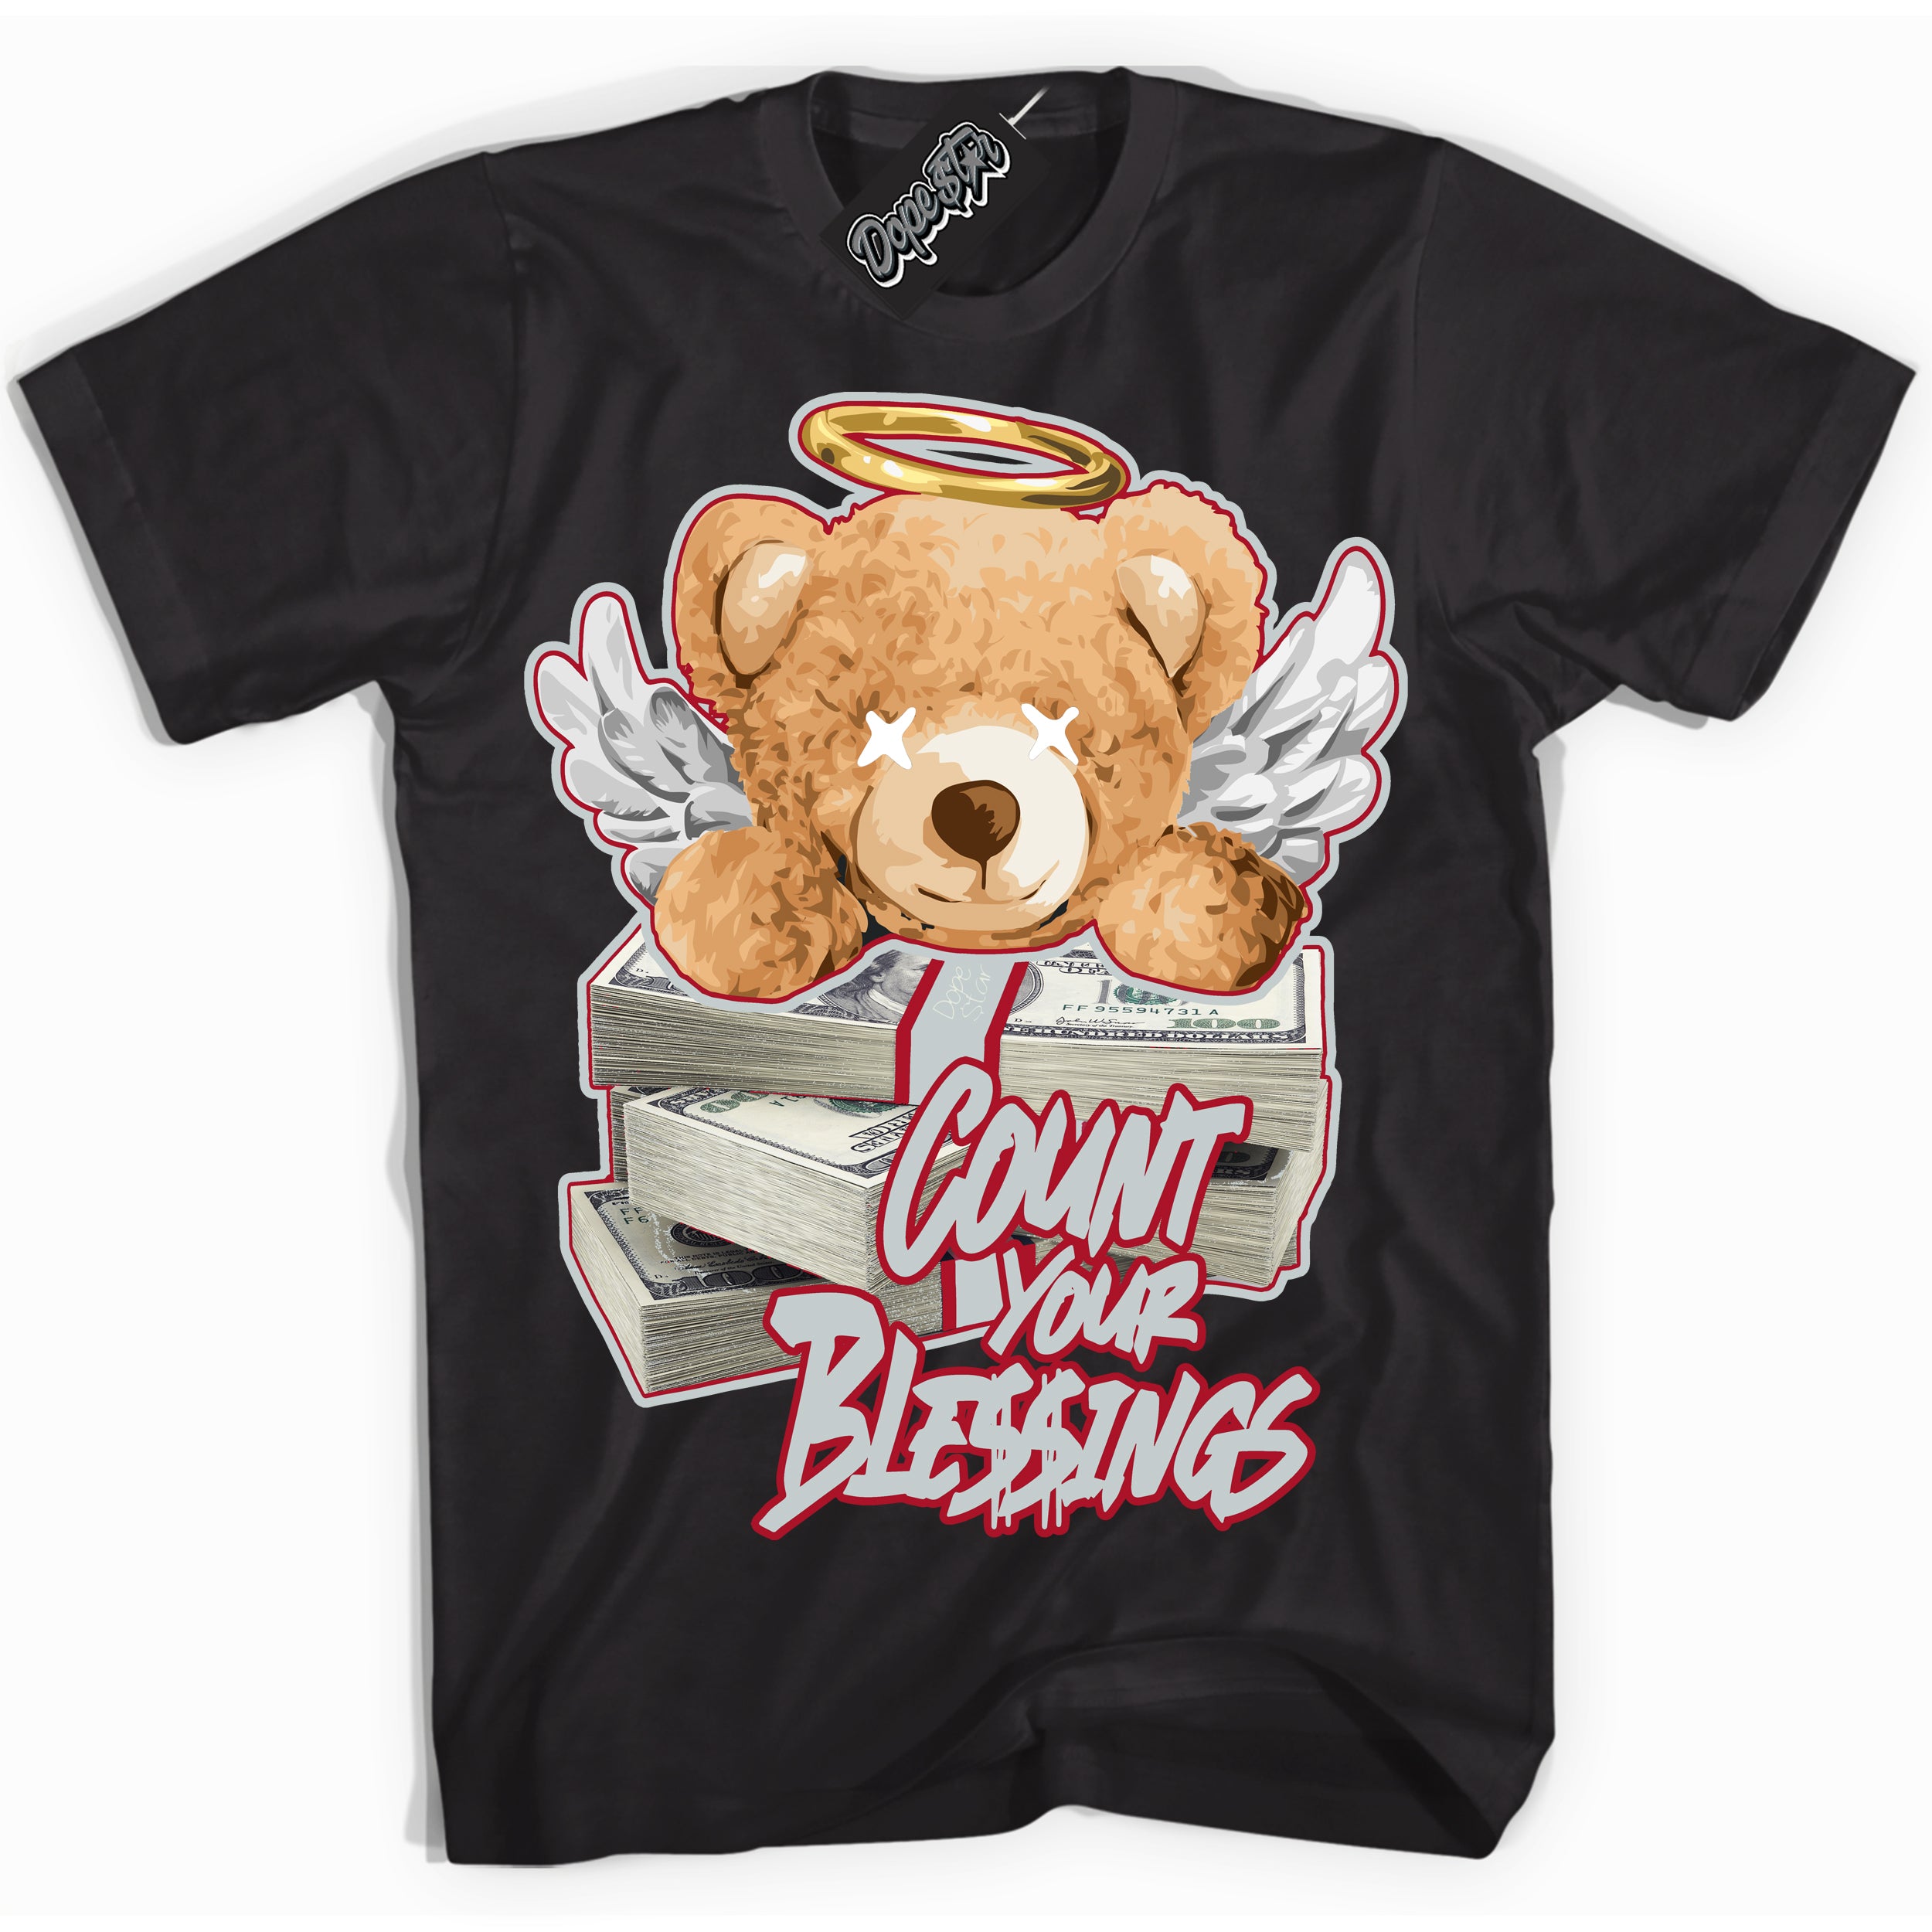 Cool Black Shirt with “ Count Your Blessings ” design that perfectly matches Reverse Ultraman Sneakers.